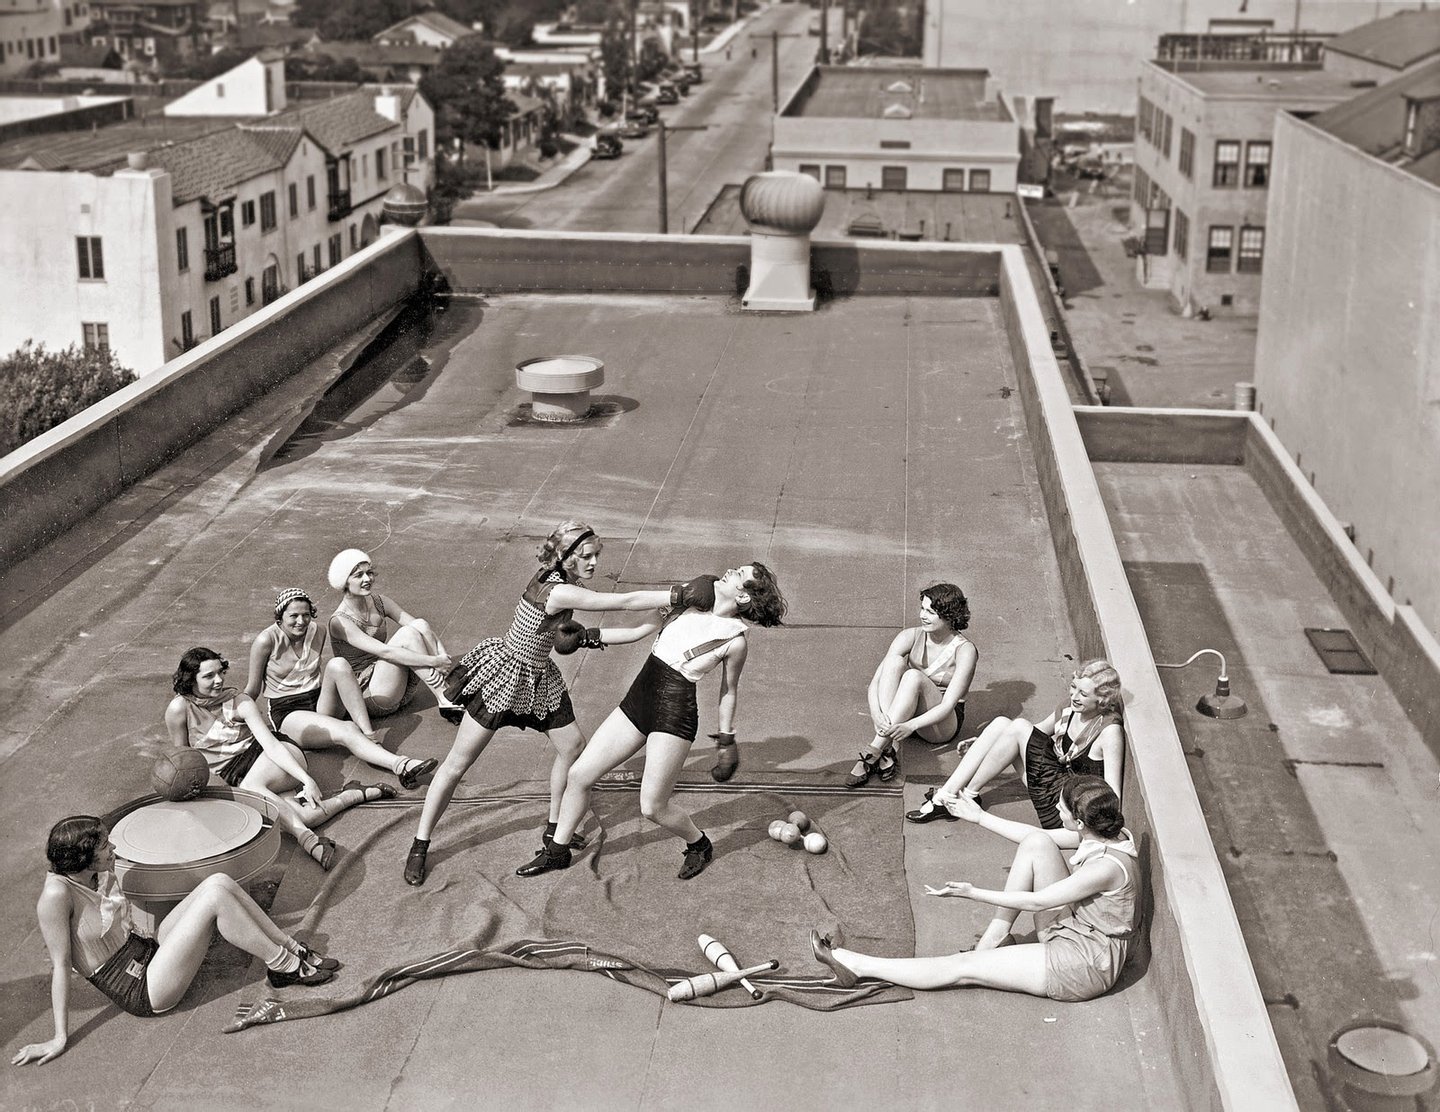 http://observador.pt/wp-content/uploads/2016/01/women-boxing-on-a-roof-1938-demateo.jpg